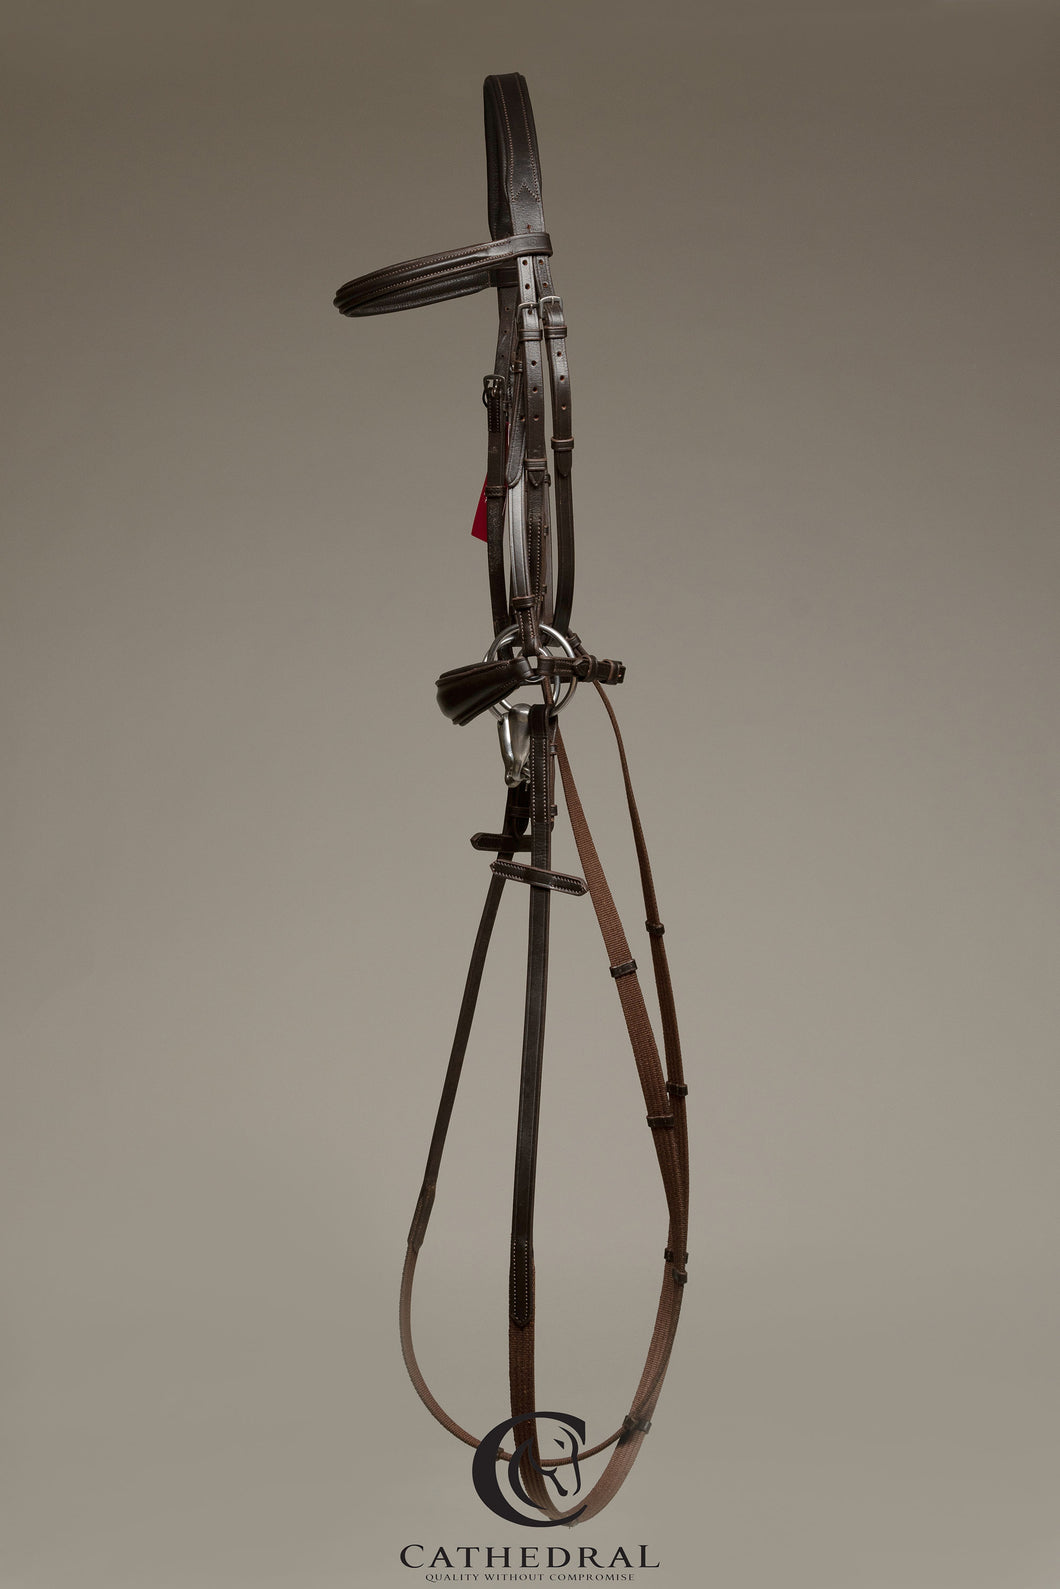 POINTON - Brown snaffle bridle with drop noseband and reins